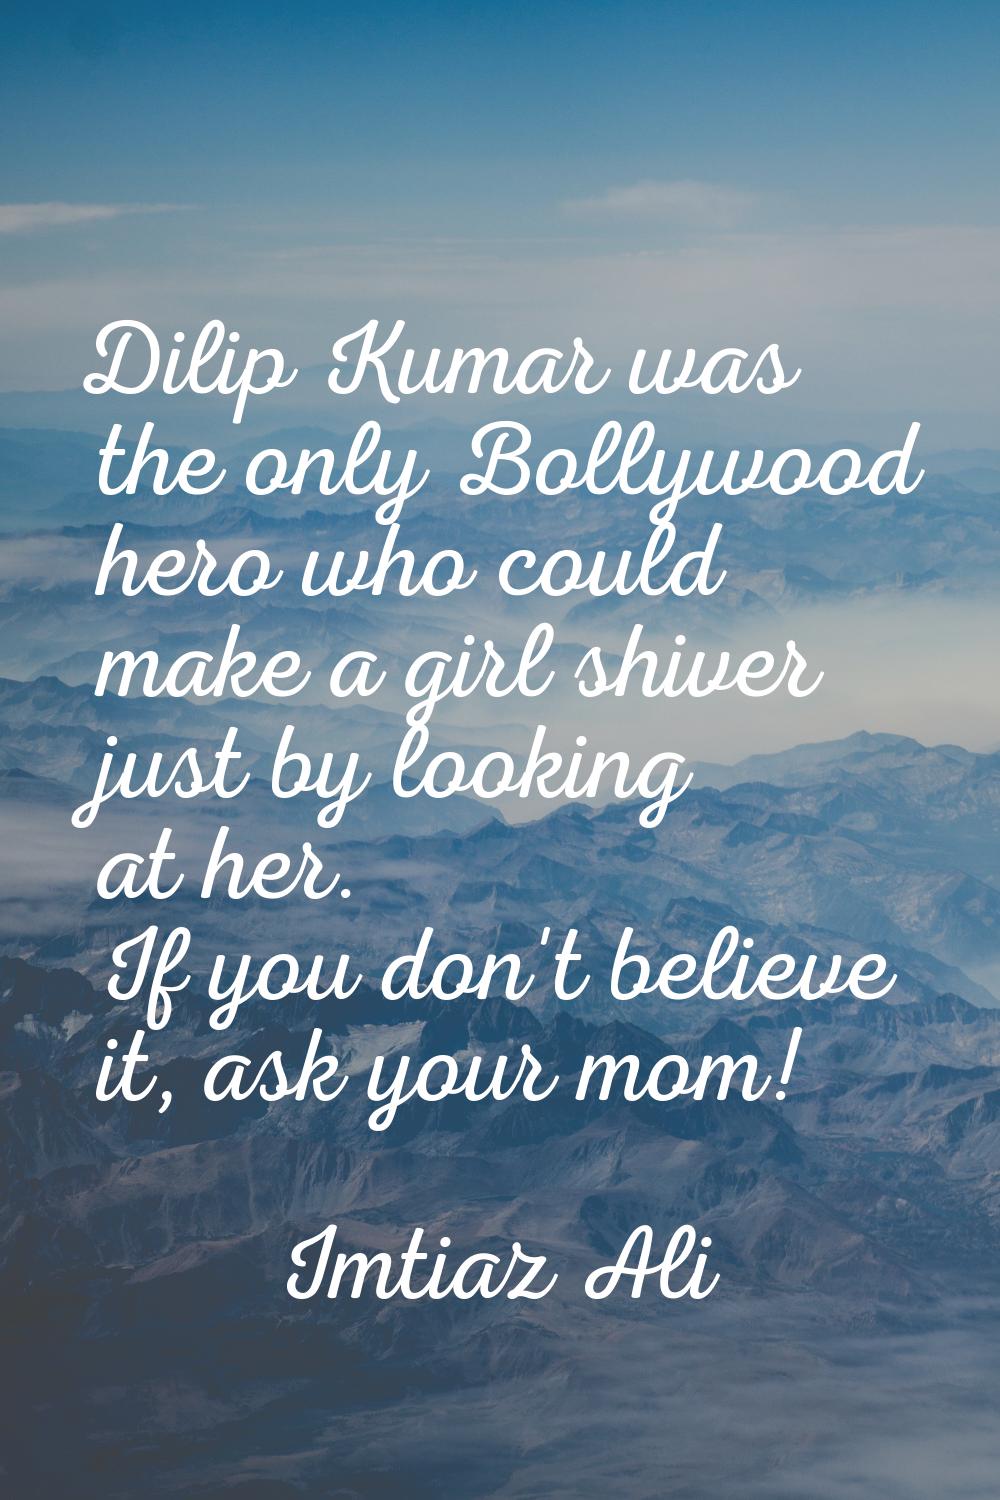 Dilip Kumar was the only Bollywood hero who could make a girl shiver just by looking at her. If you